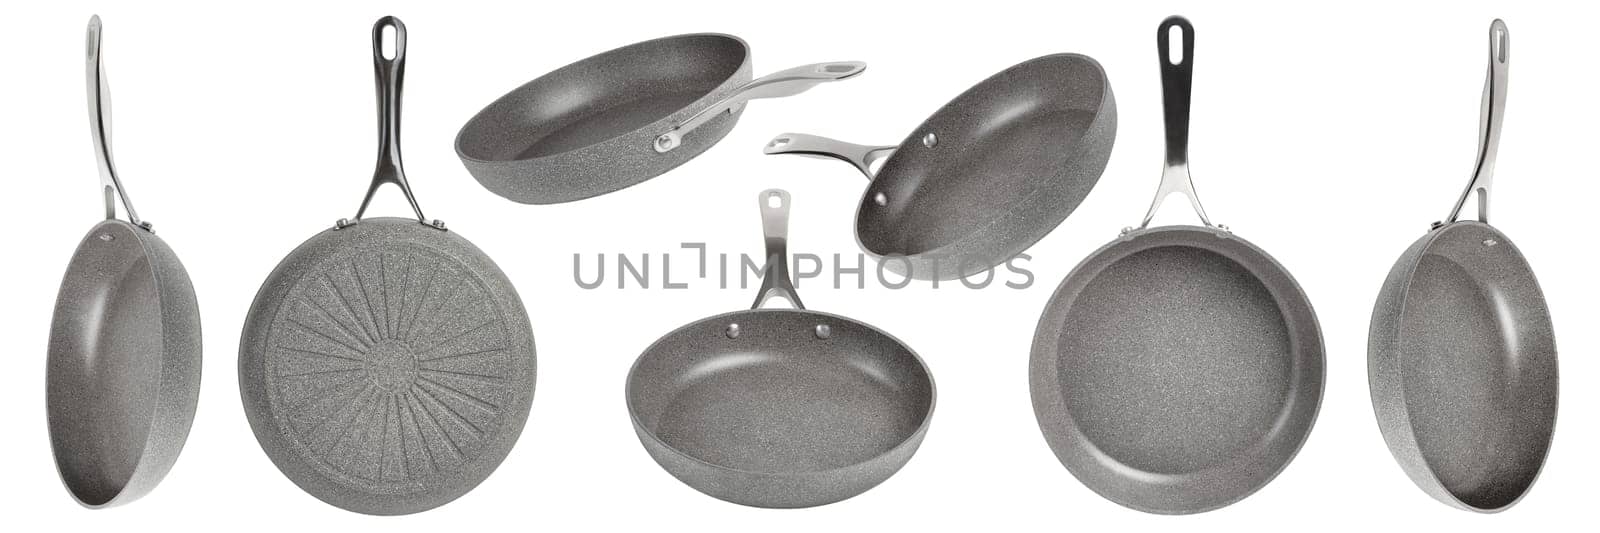 Big set of frying pans with non-stick coating on a white isolated background. New gray frying pans, clipart for inserting into a design or project. Overlay for kitchen theme. Different angle.